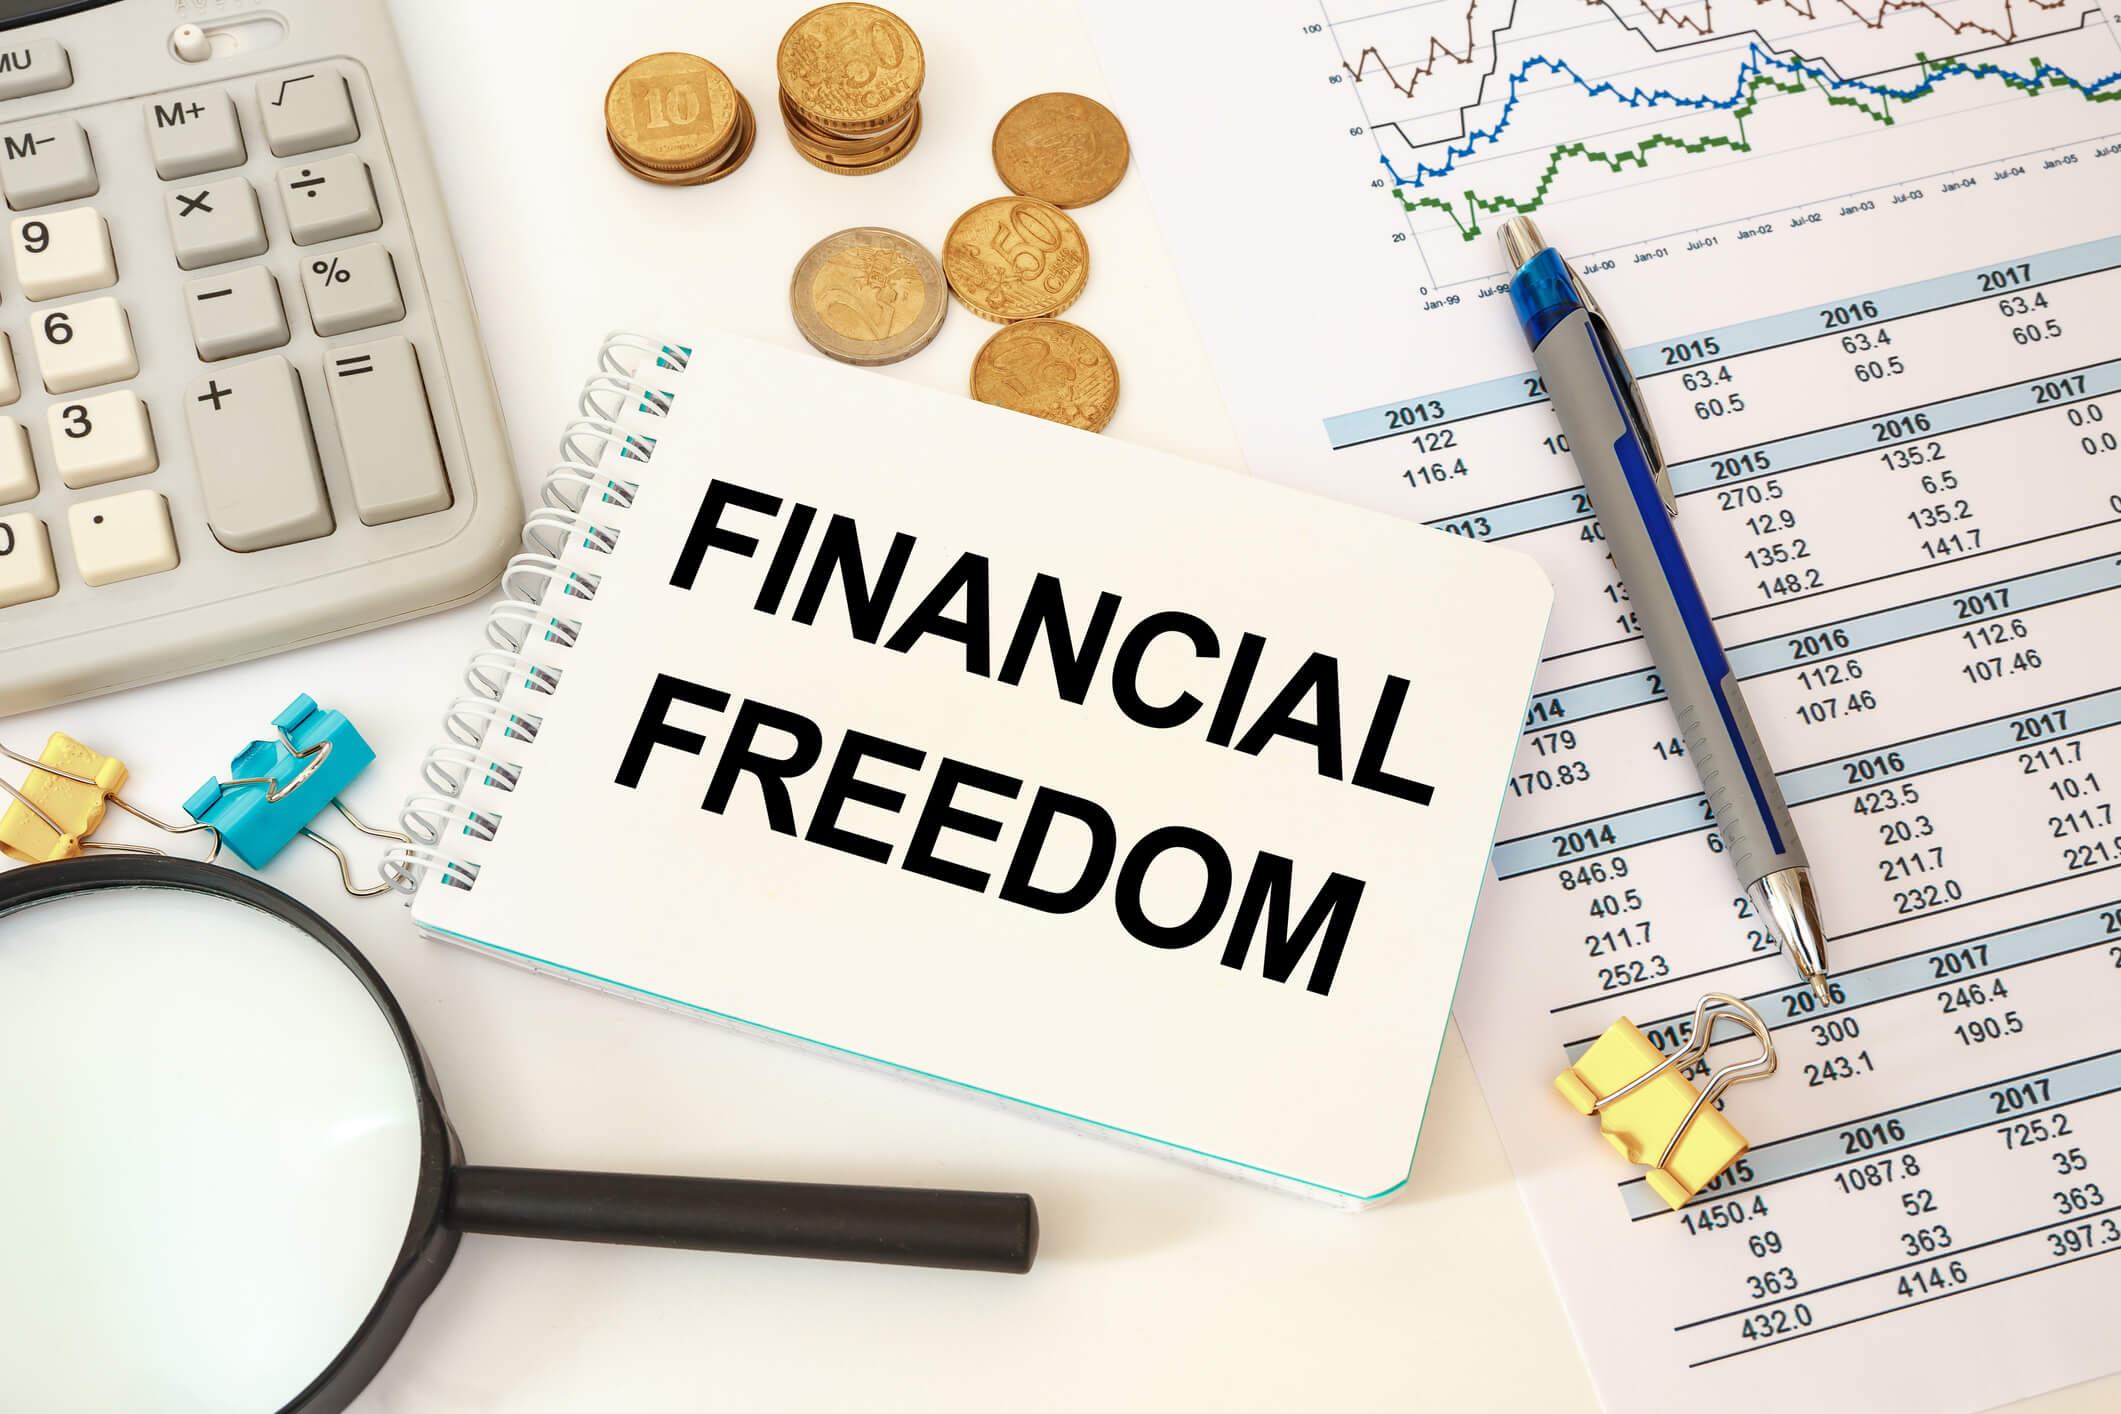 Financial Freedom - Complete Controller